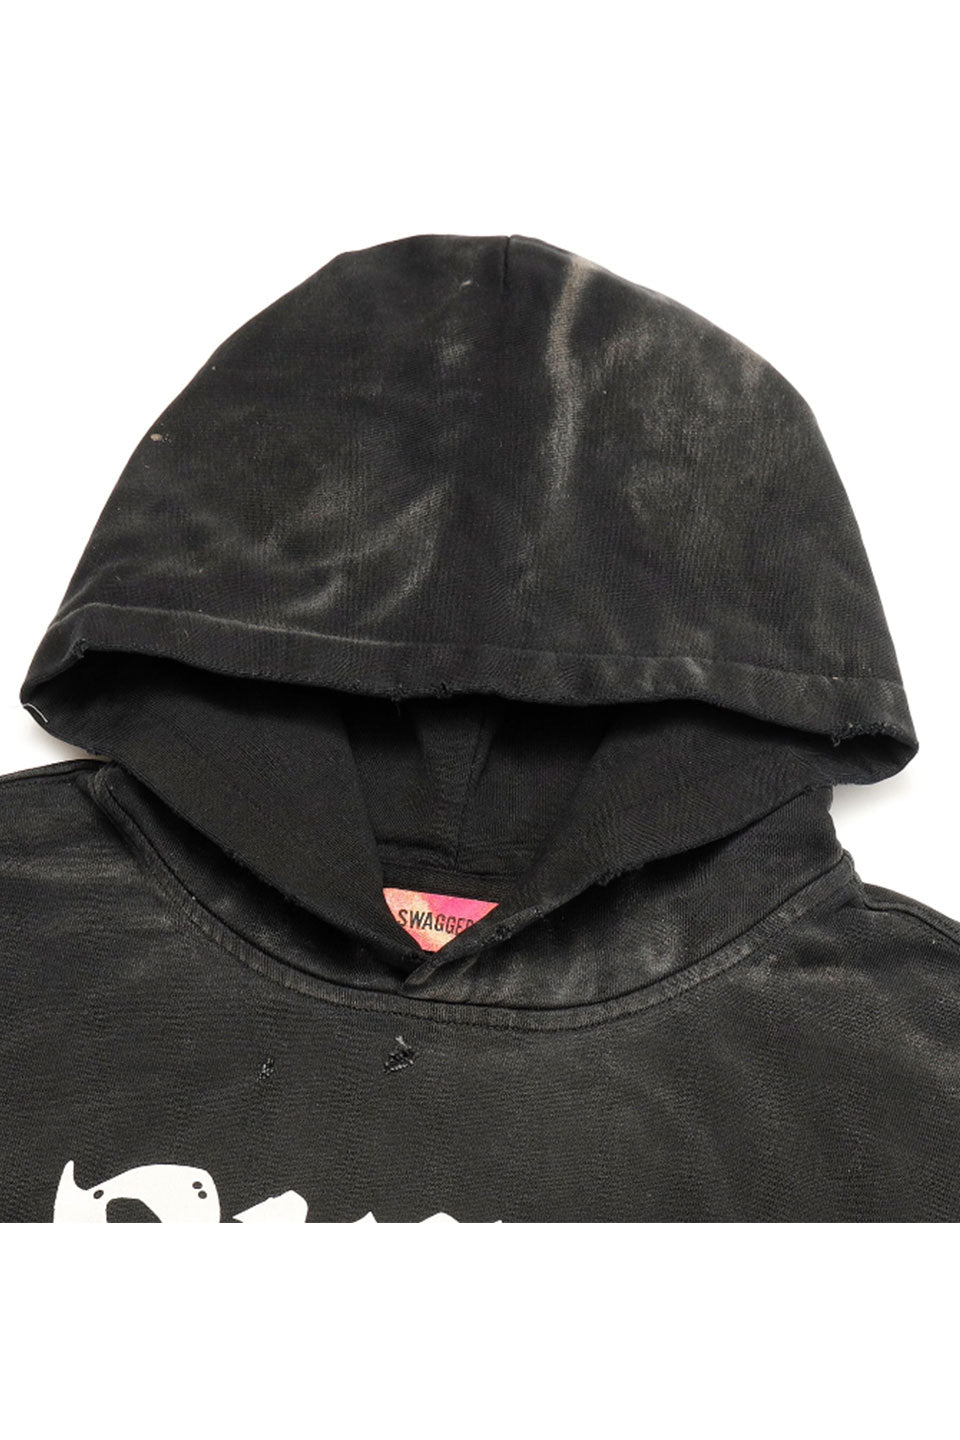 Heavy Weight Pullover Hoodie